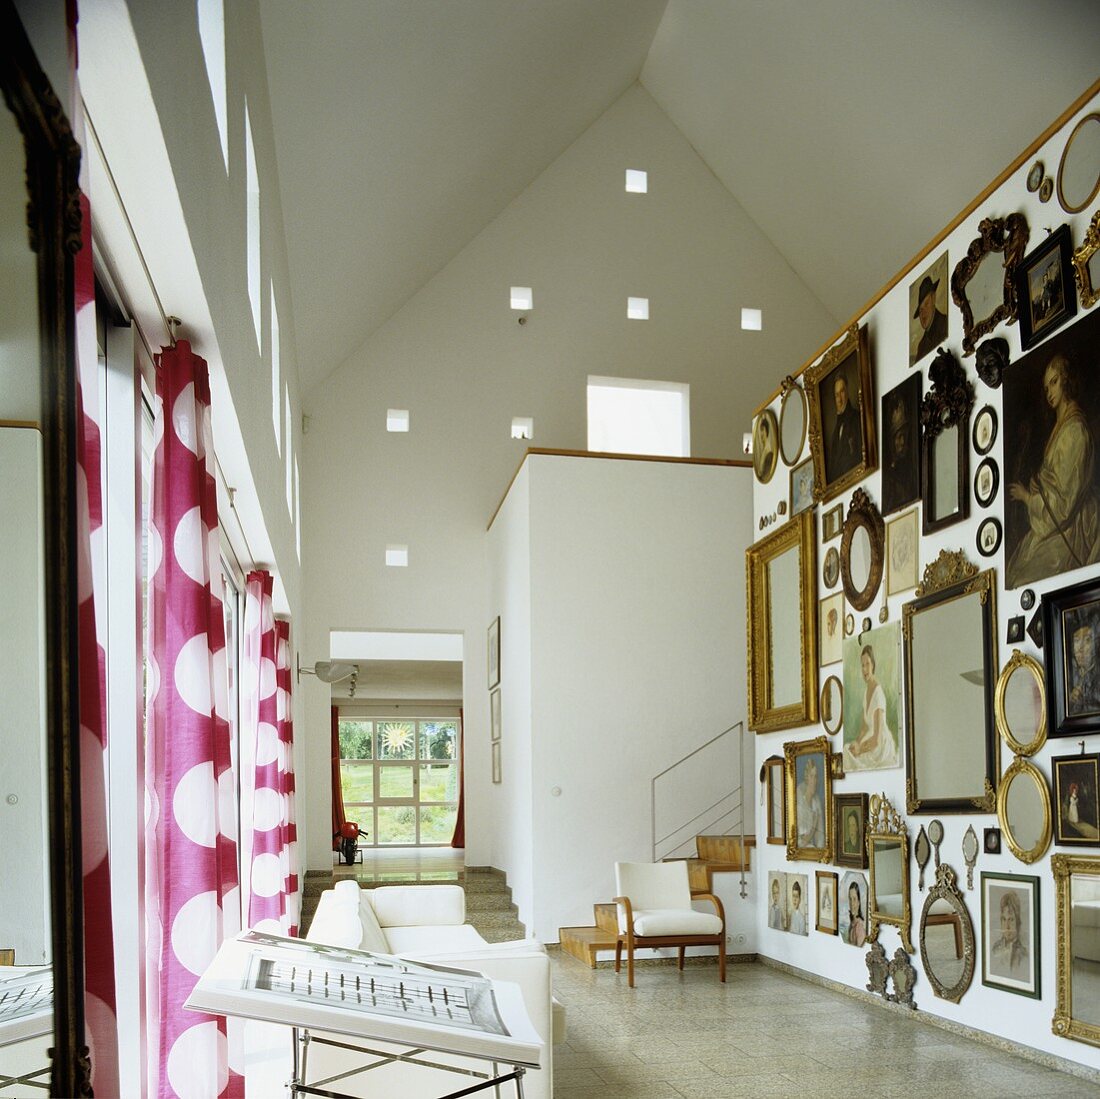 An open-plan living room with a collection of mirror on the wall and a window set into the gable wall